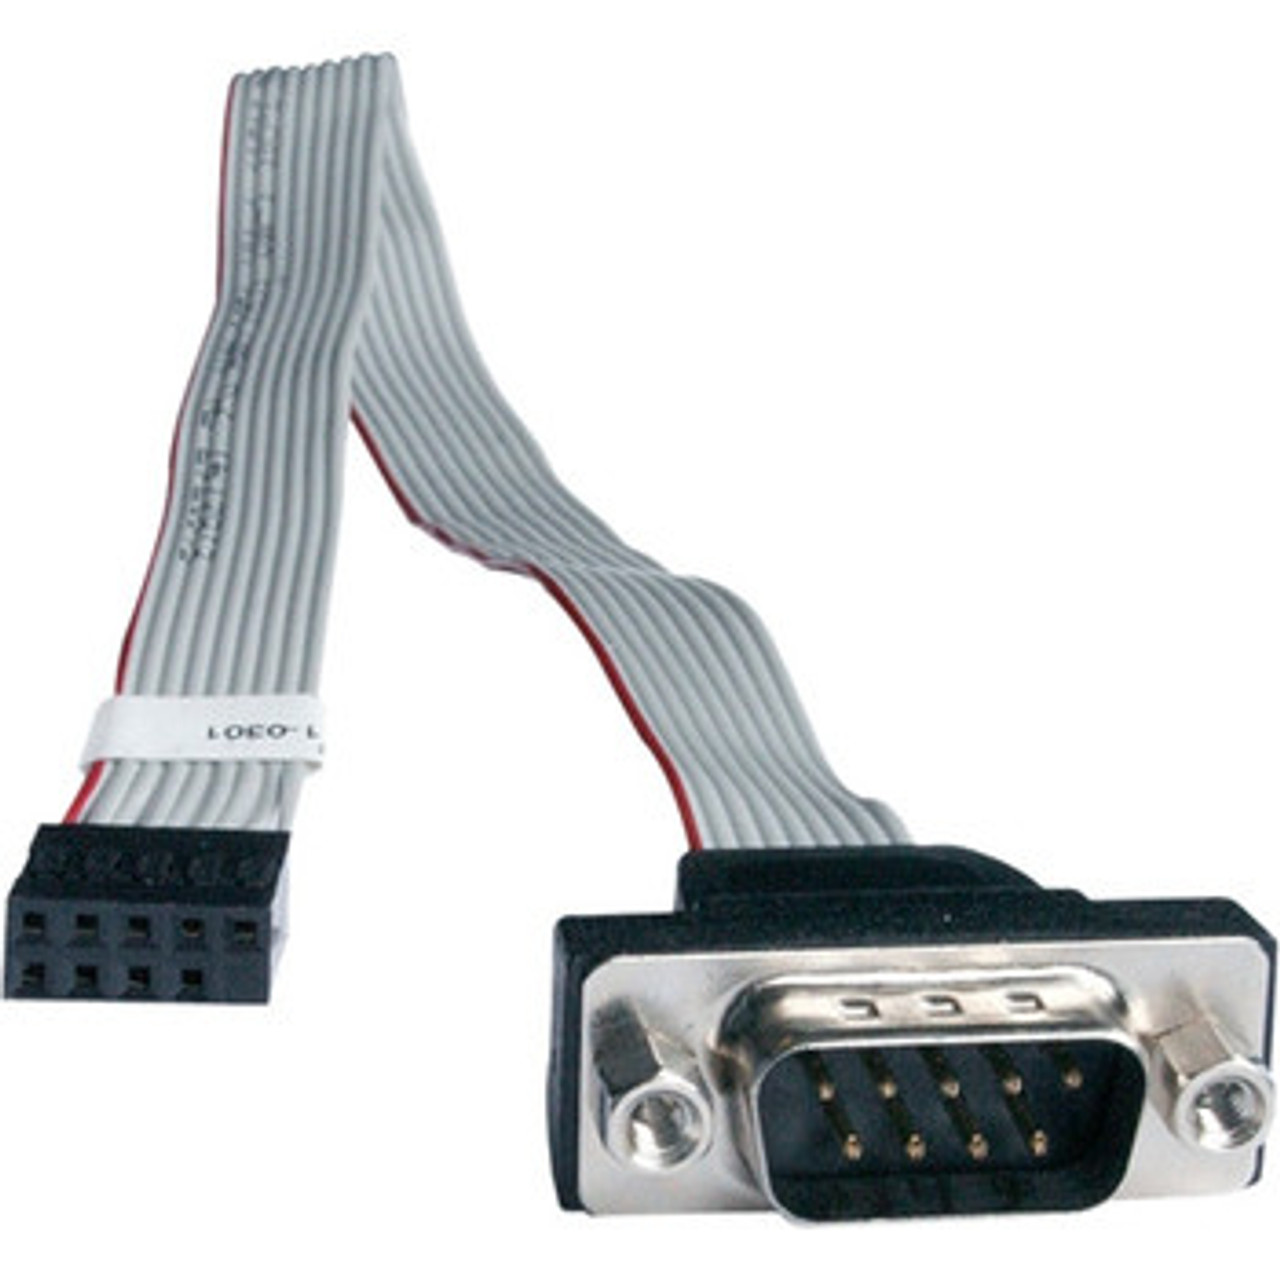 H-RS232 | SHUTTLE | Serial Cable Serial 1.05 Ft 1 X Db-9 Male Serial 1 X Female Serial